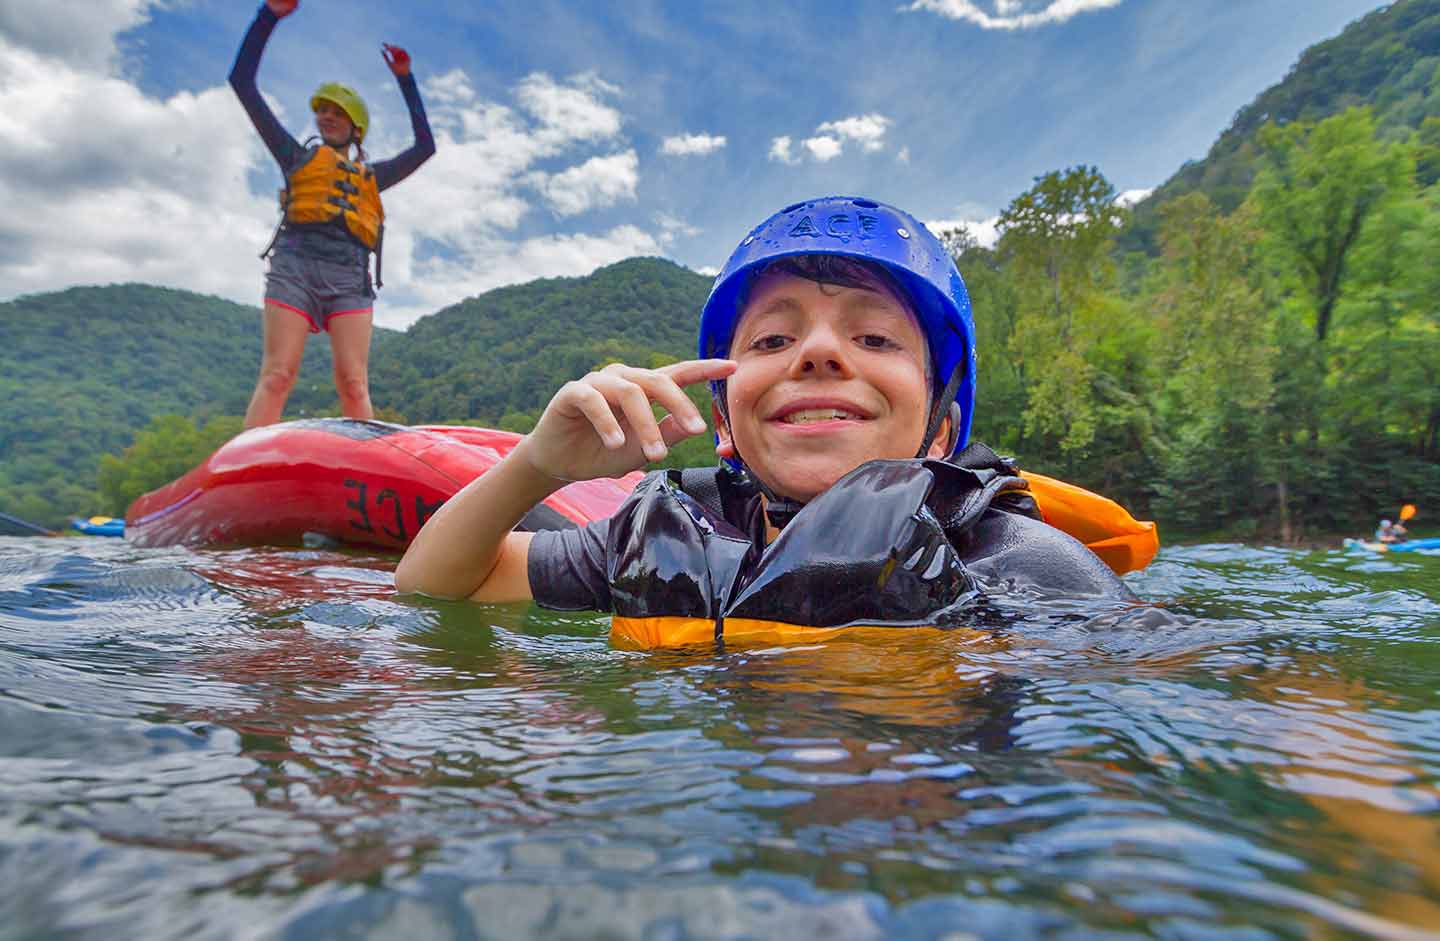 Two members of Scouts BSA have fun in the water upper new rafting in west virginia,